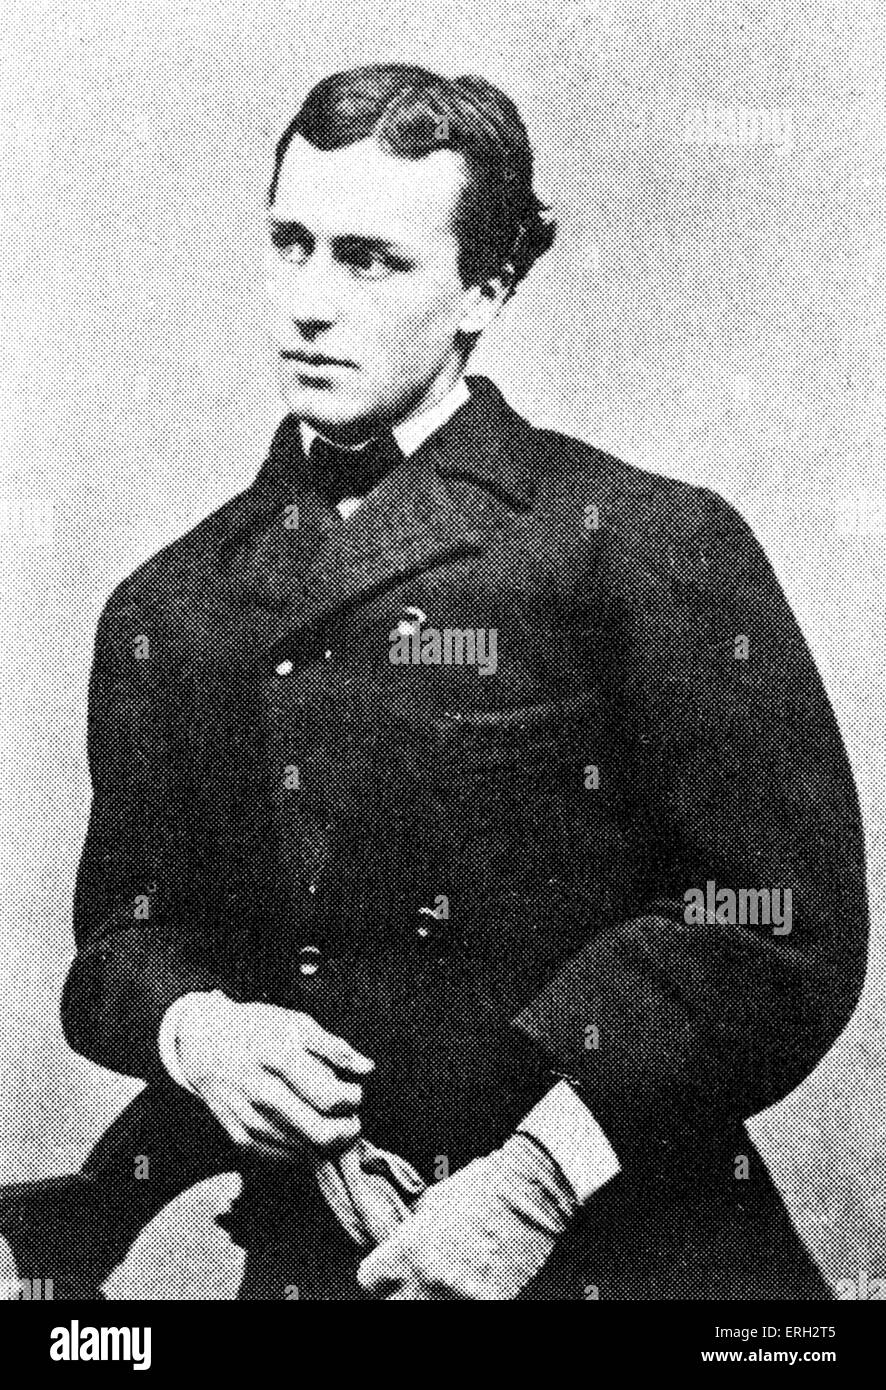 Henry James as a Harvard student, aged 20, Newport. American  author, 15 April 15, 1843 –  28 February 1916. Stock Photo